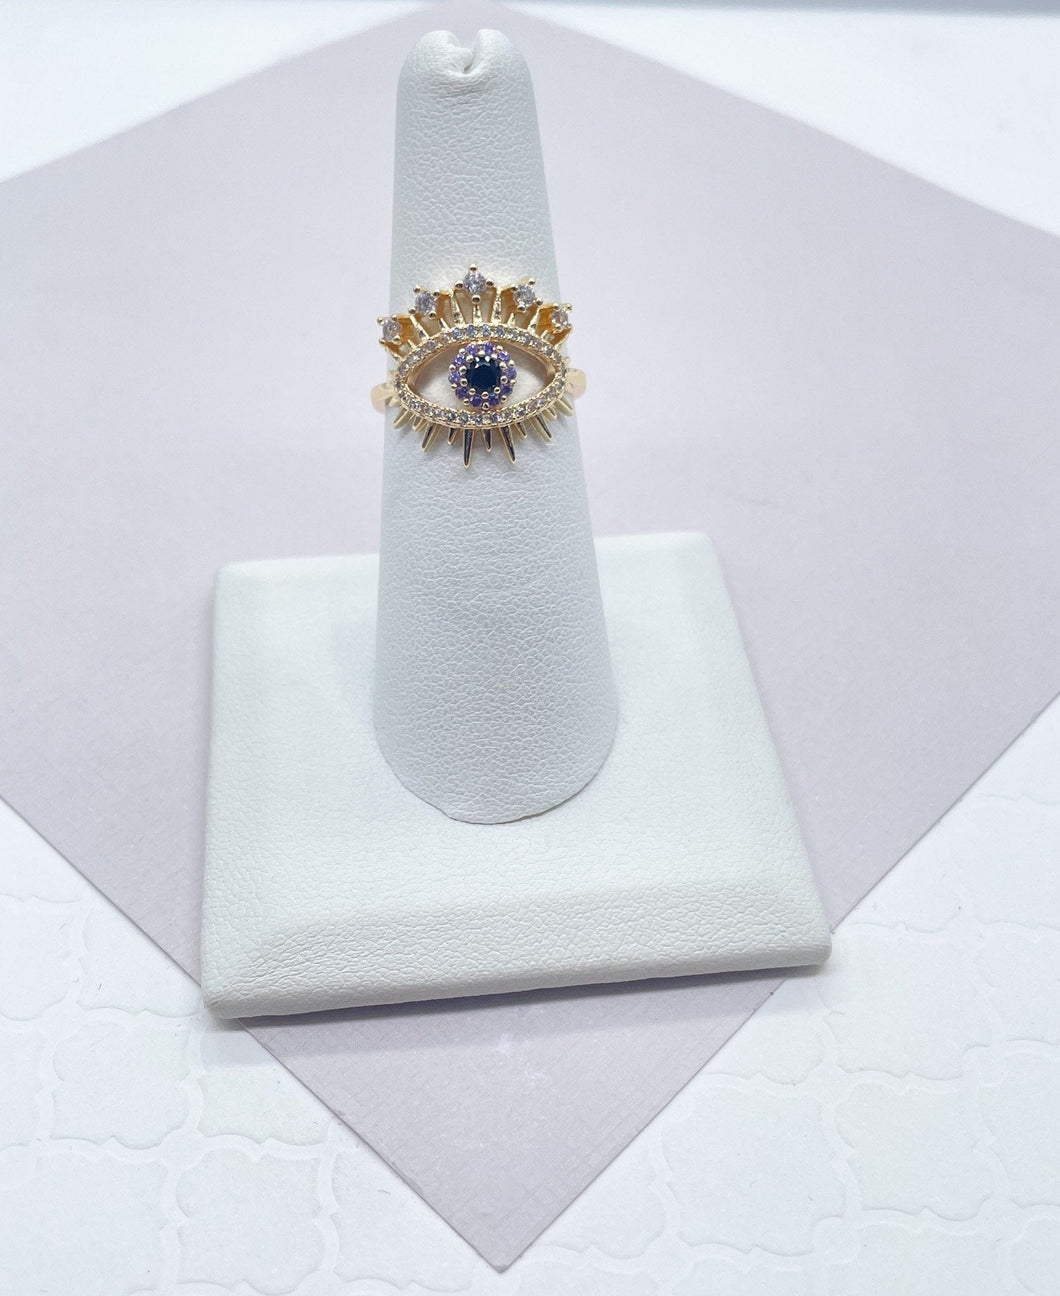 18k Gold Filled Evil Eye Ring Crowned Featuring Multi Color Zirconia Stones Or Clear Cubic Zirconia, Protection Ring,  Jewelry